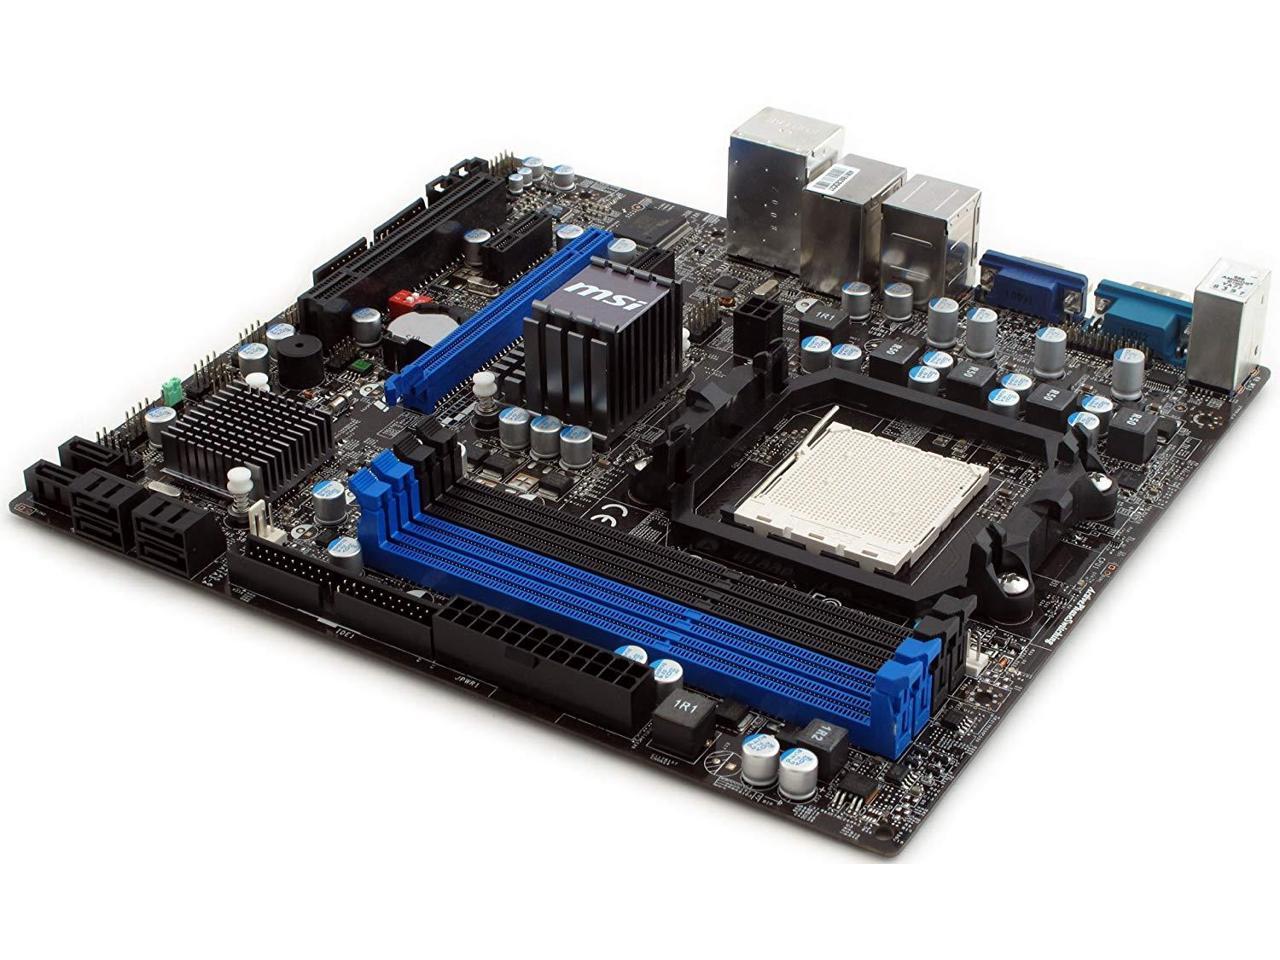 MSI 785GM-P45 Main System Motherboard Mainboard AM3 SB710 MS-7623 Ver 2